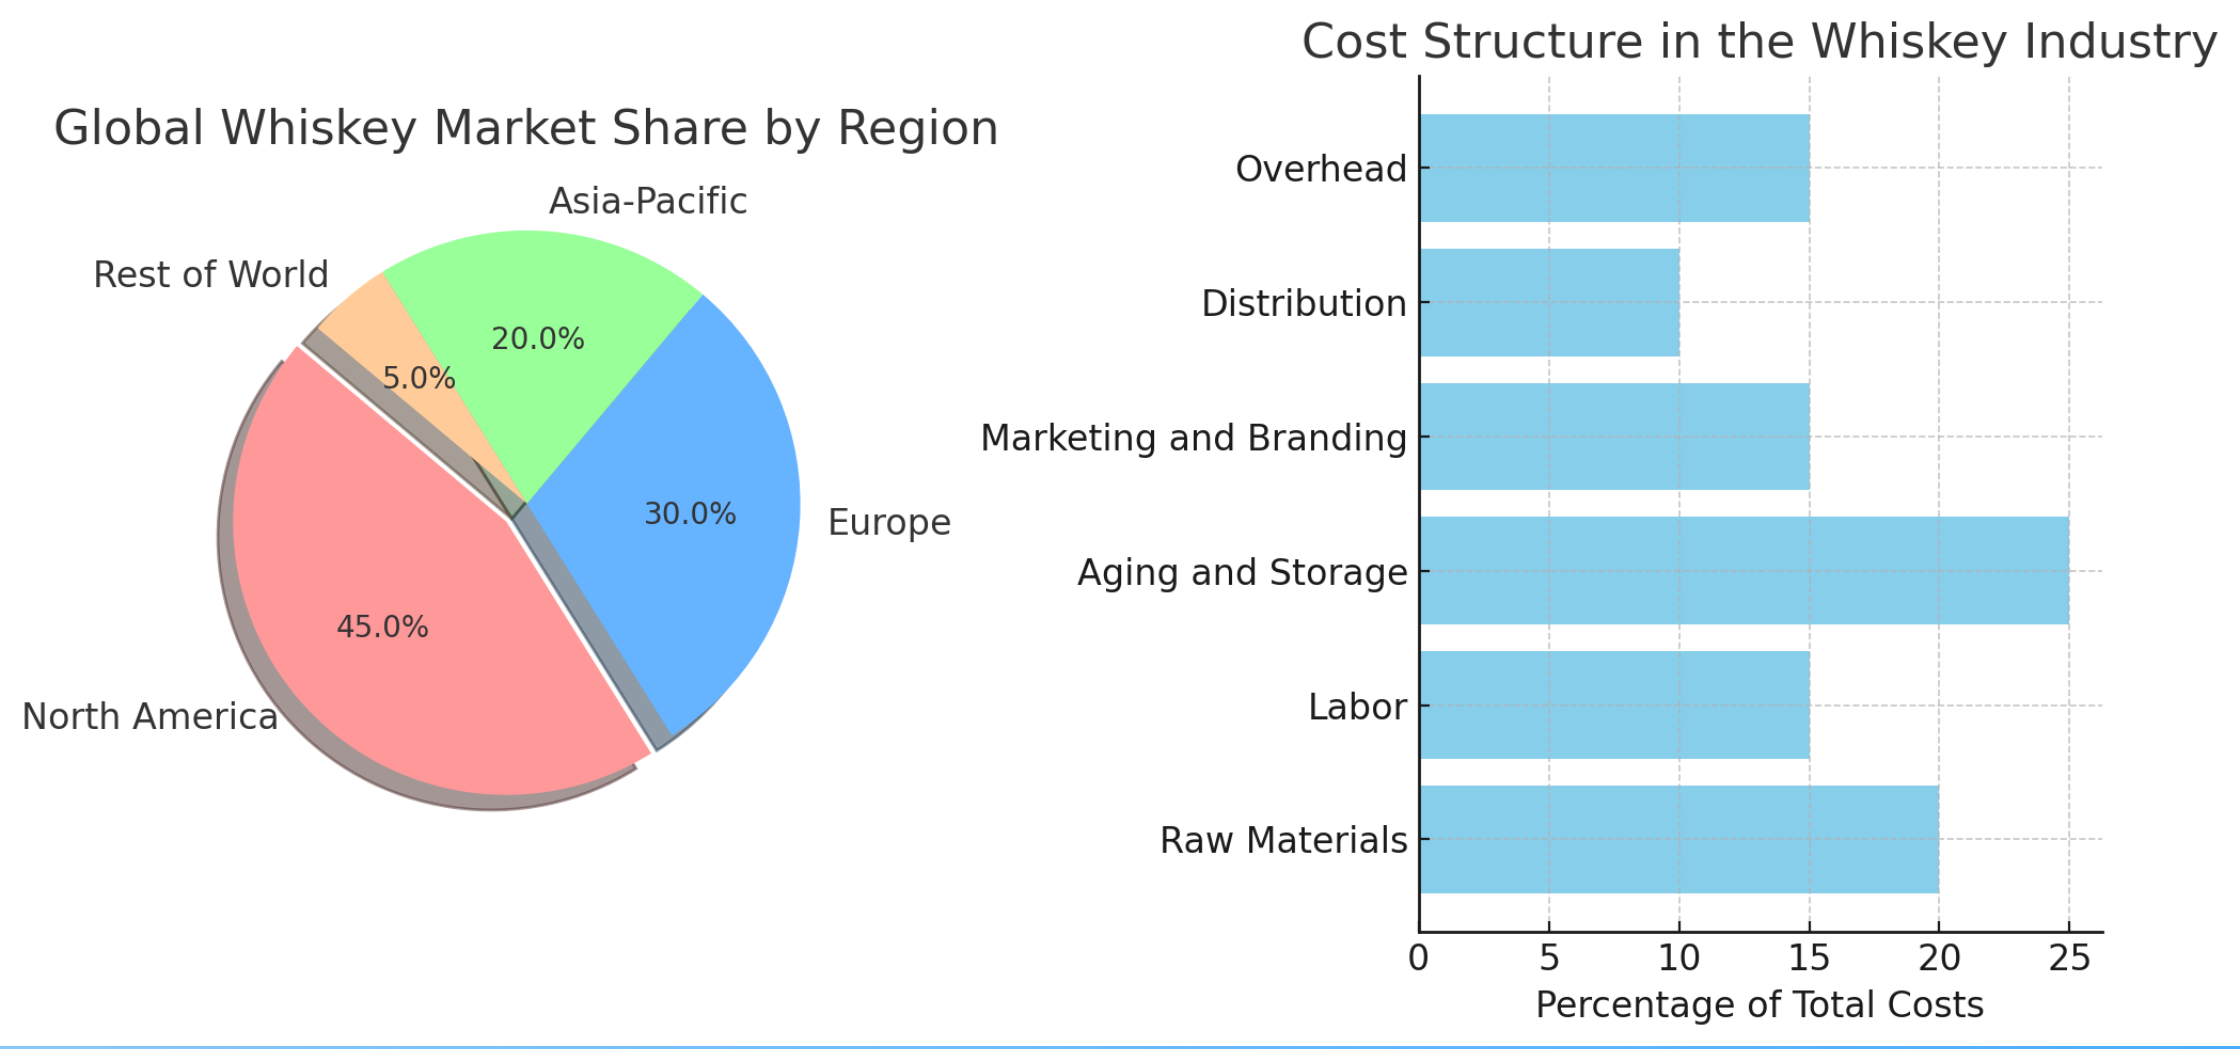 Pie chart showing global whiskey market share by region and bar chart detailing the cost structure in the whiskey industry.